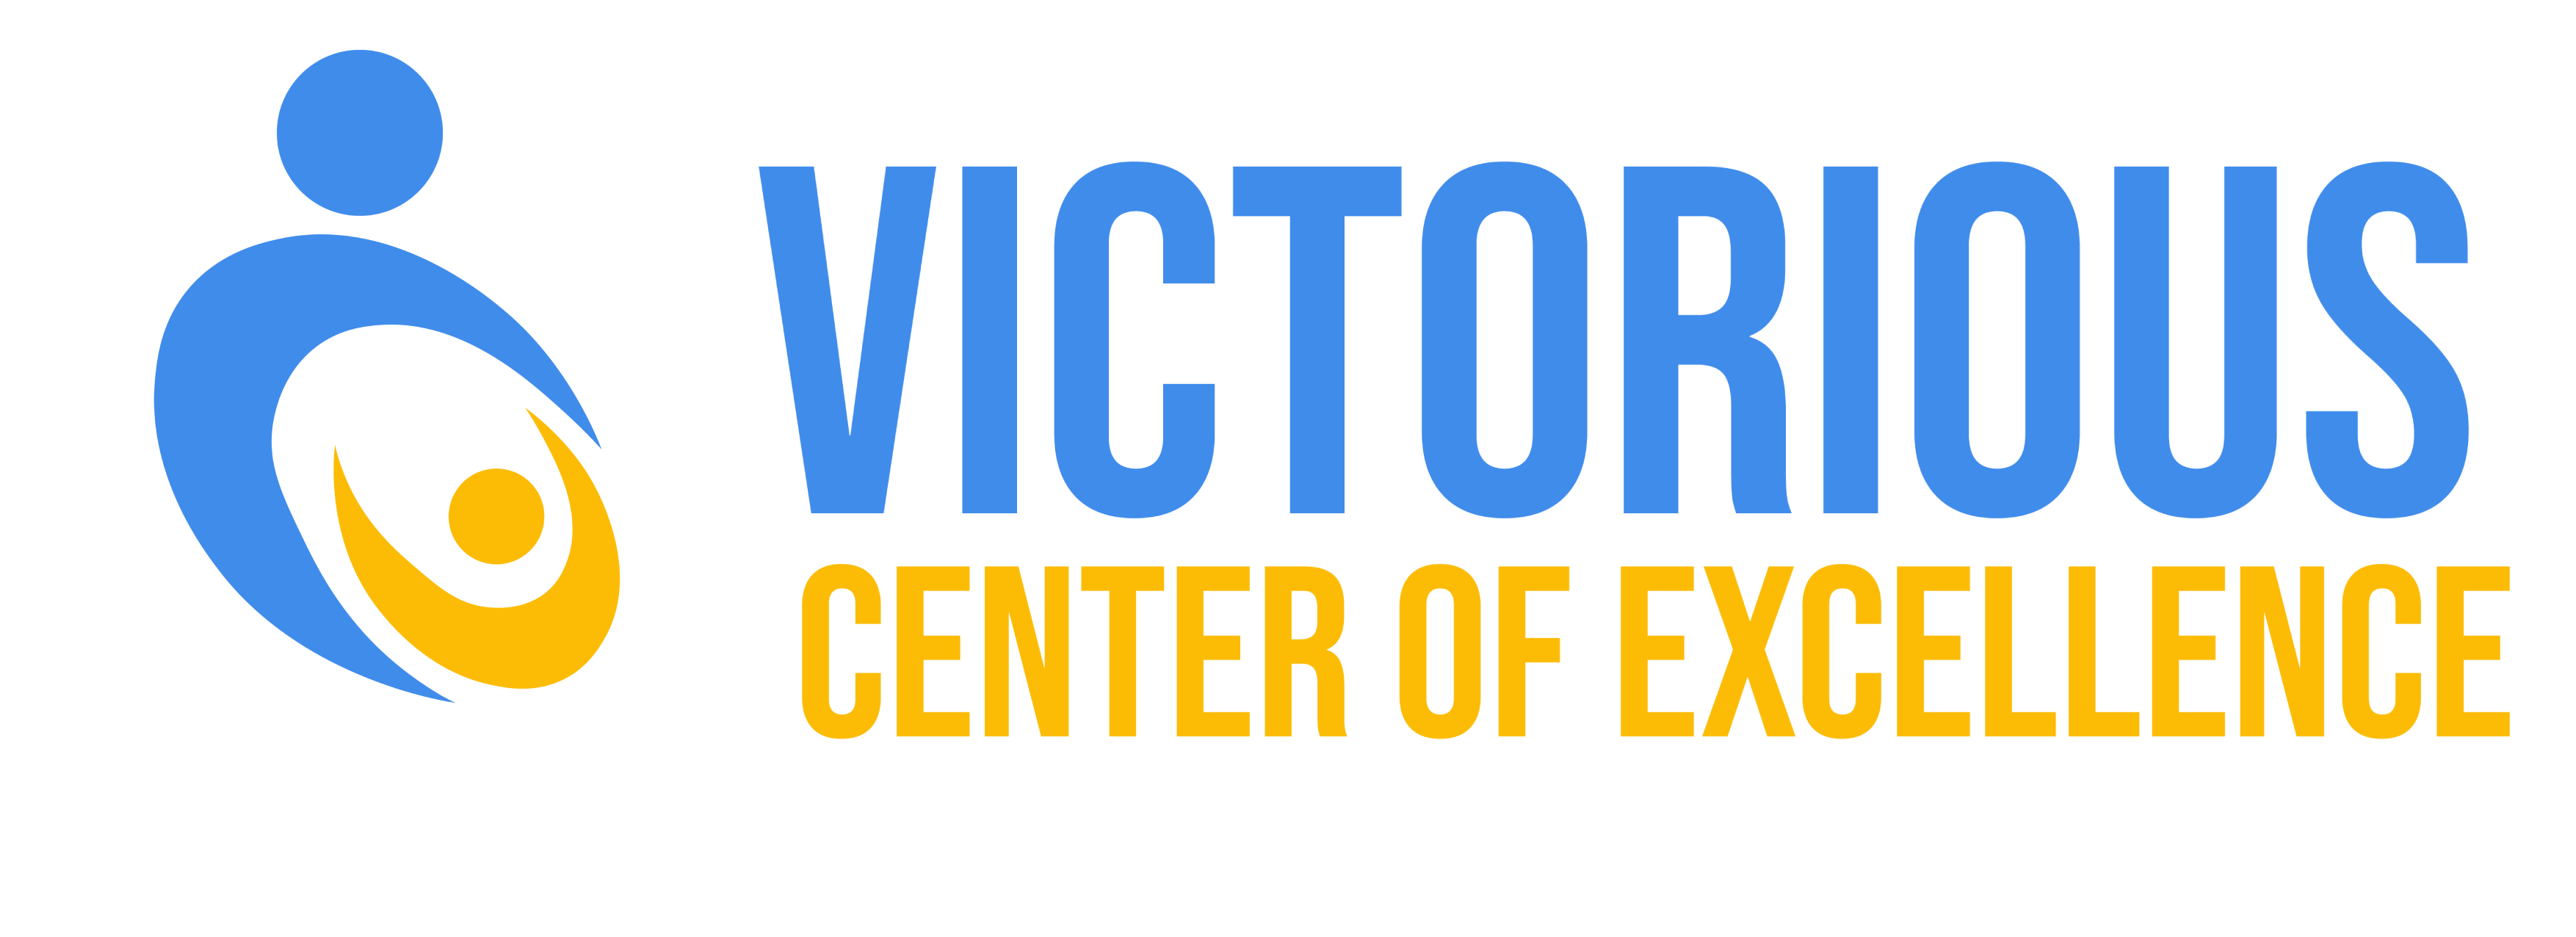 VICTORIOUS CENTER OF EXCELLENCE